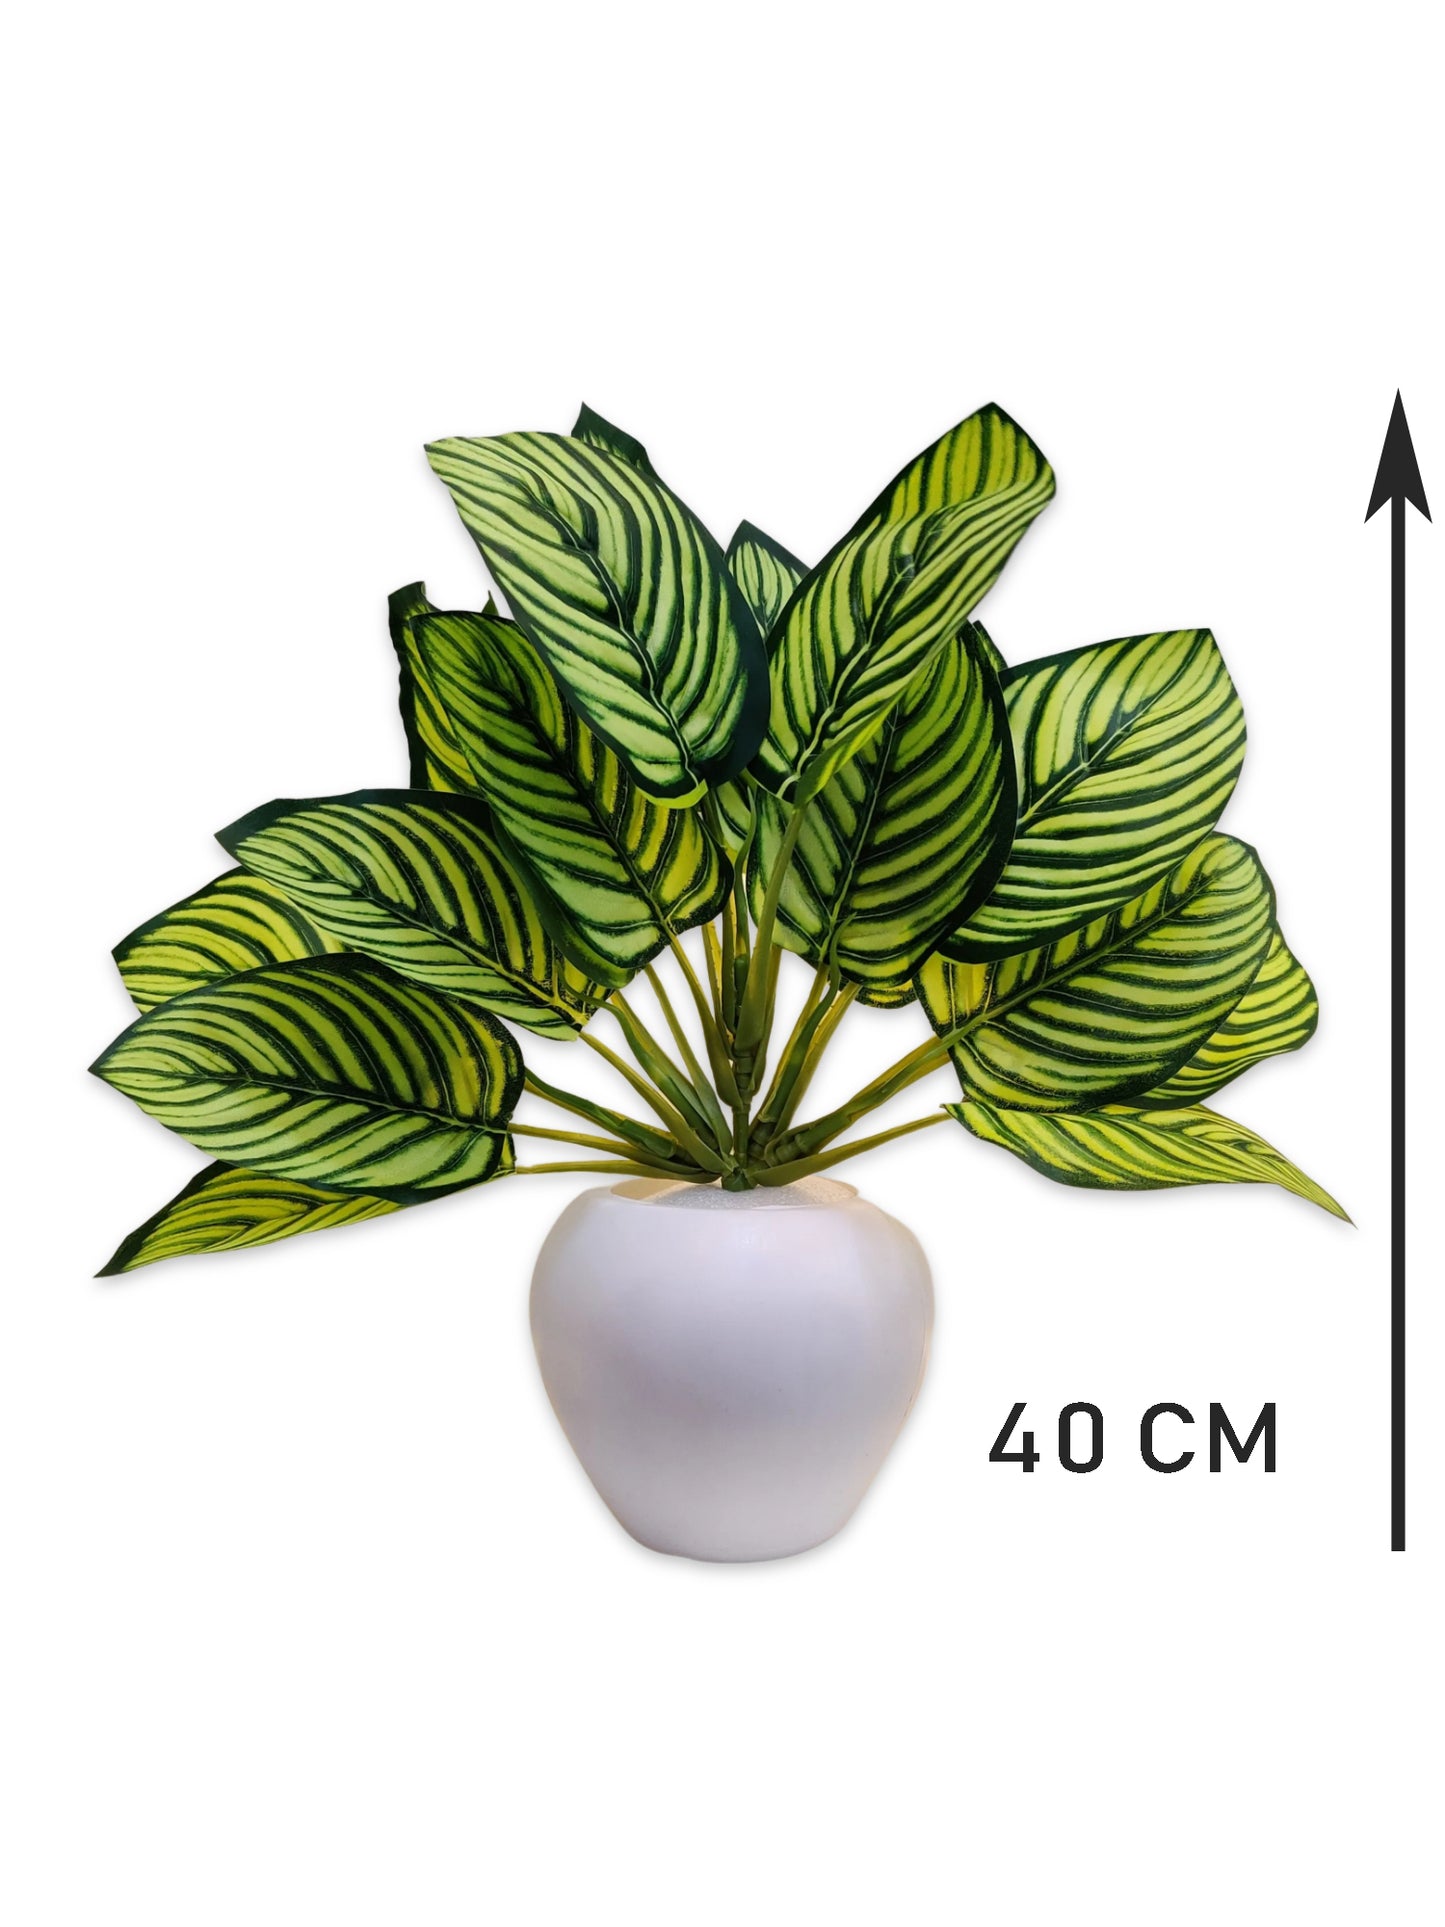 Blooming Beauty: Artificial Plant in Stylish Pot for Effortless Home Decor. Artificial Leaves with Pot Plants for Home Decoration, Leaves Bunch Flowers with Pot Office Decor, Craft and DIY, Combo, Green mix